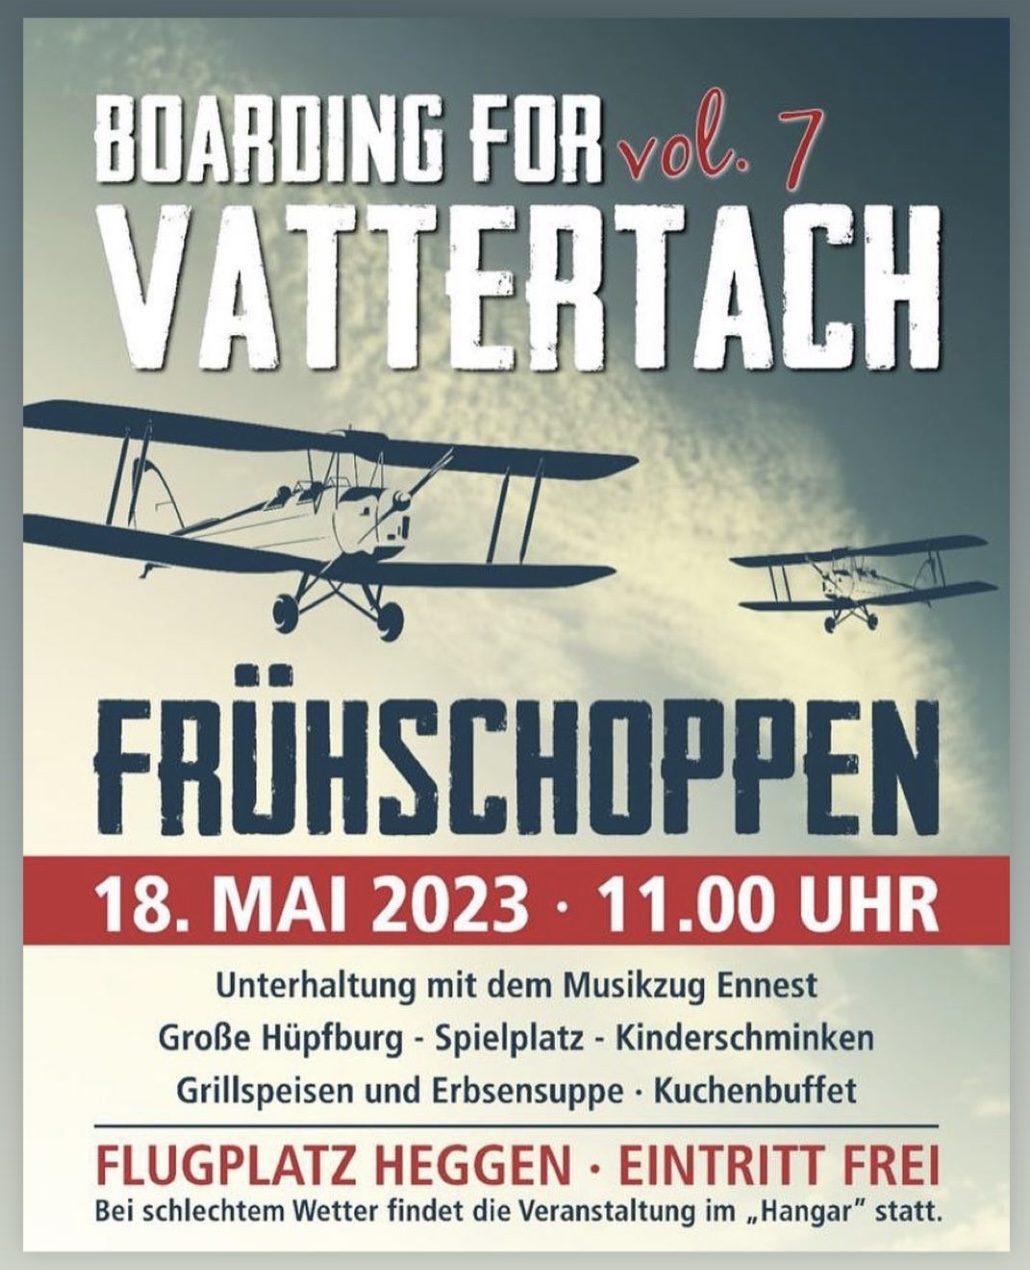 You are currently viewing Boarding for Vattertach